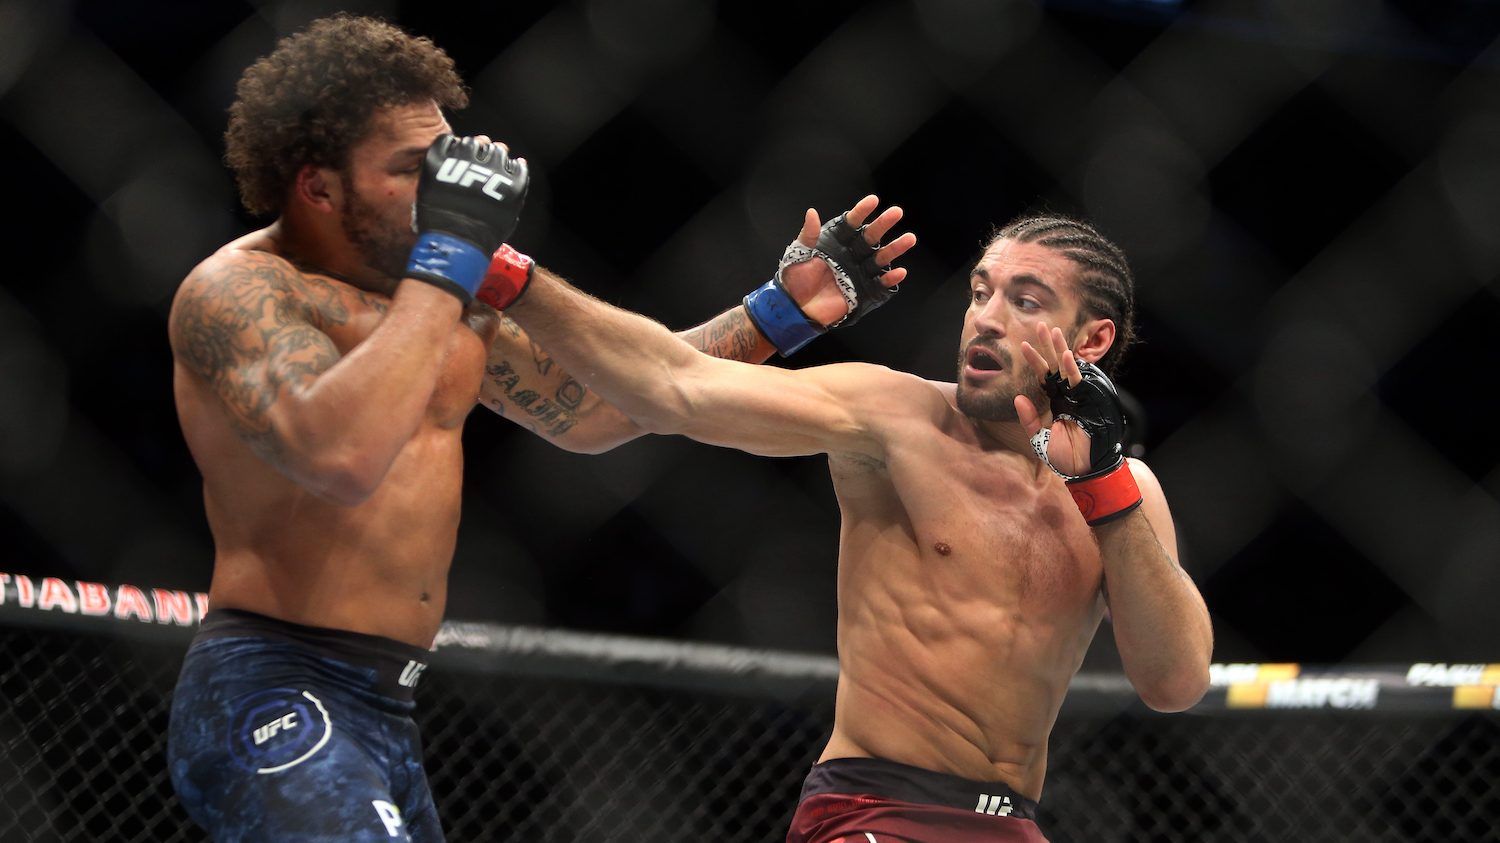 In 2020 Elias Theodorou became the first MMA fighter in history to receive a therapeutic use exemption (TUE) for medical cannabis for pain in his wrists and elbows. (Photo by Vaughn Ridley/Getty Images).